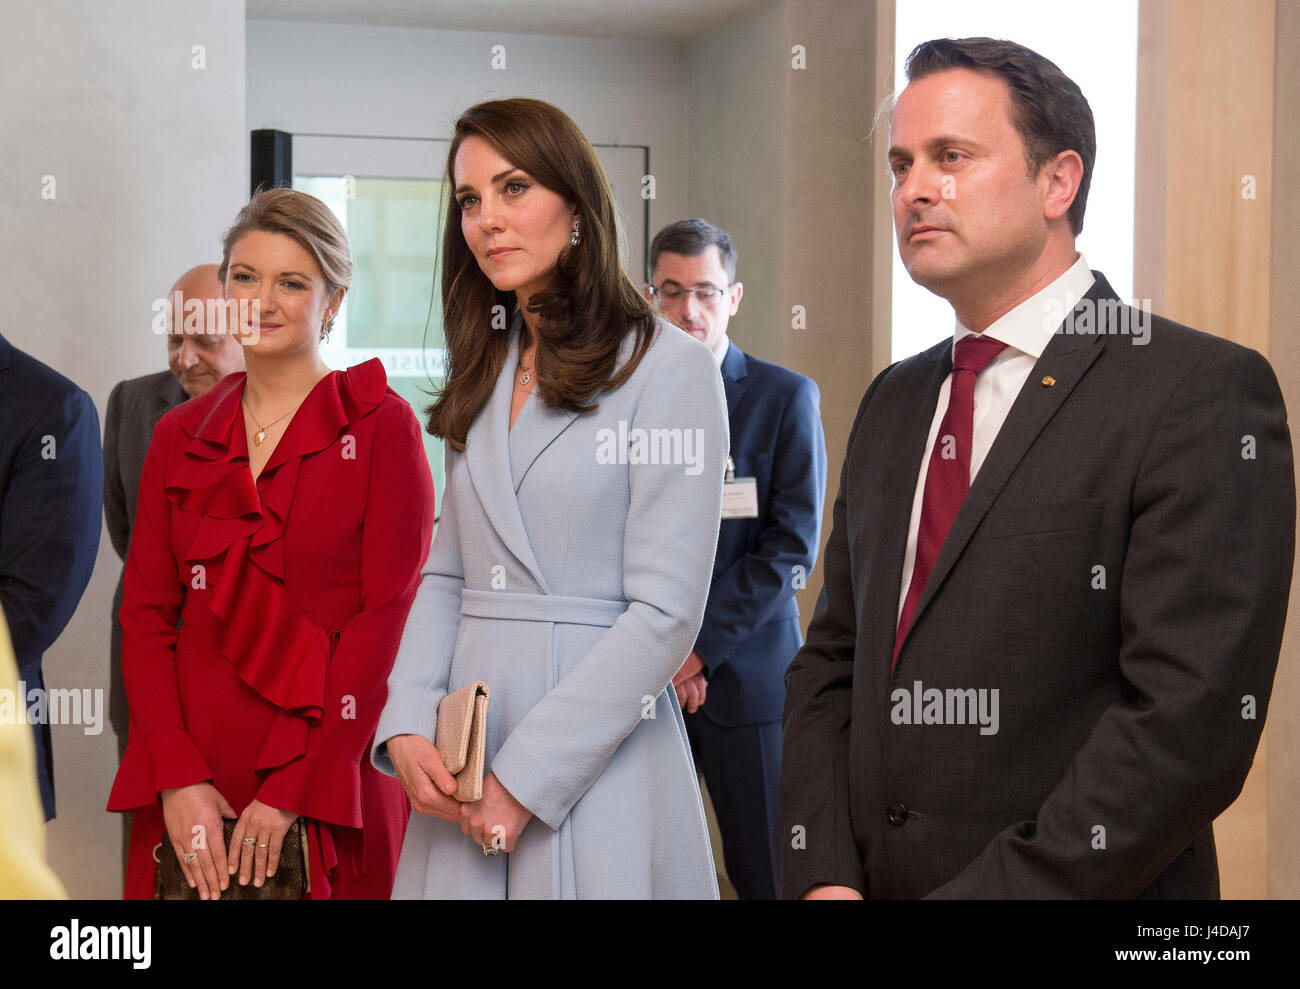 The Duchess of Cambridge during a visit to the Luxembourg City Museum, where she viewed an exhibition about the city state's history and walked along the Cornicjhe, during a day of visits in Luxembourg where she is attending commemorations marking the 150th anniversary 1867 Treaty of London, that confirmed the country's independence and neutrality. Stock Photo